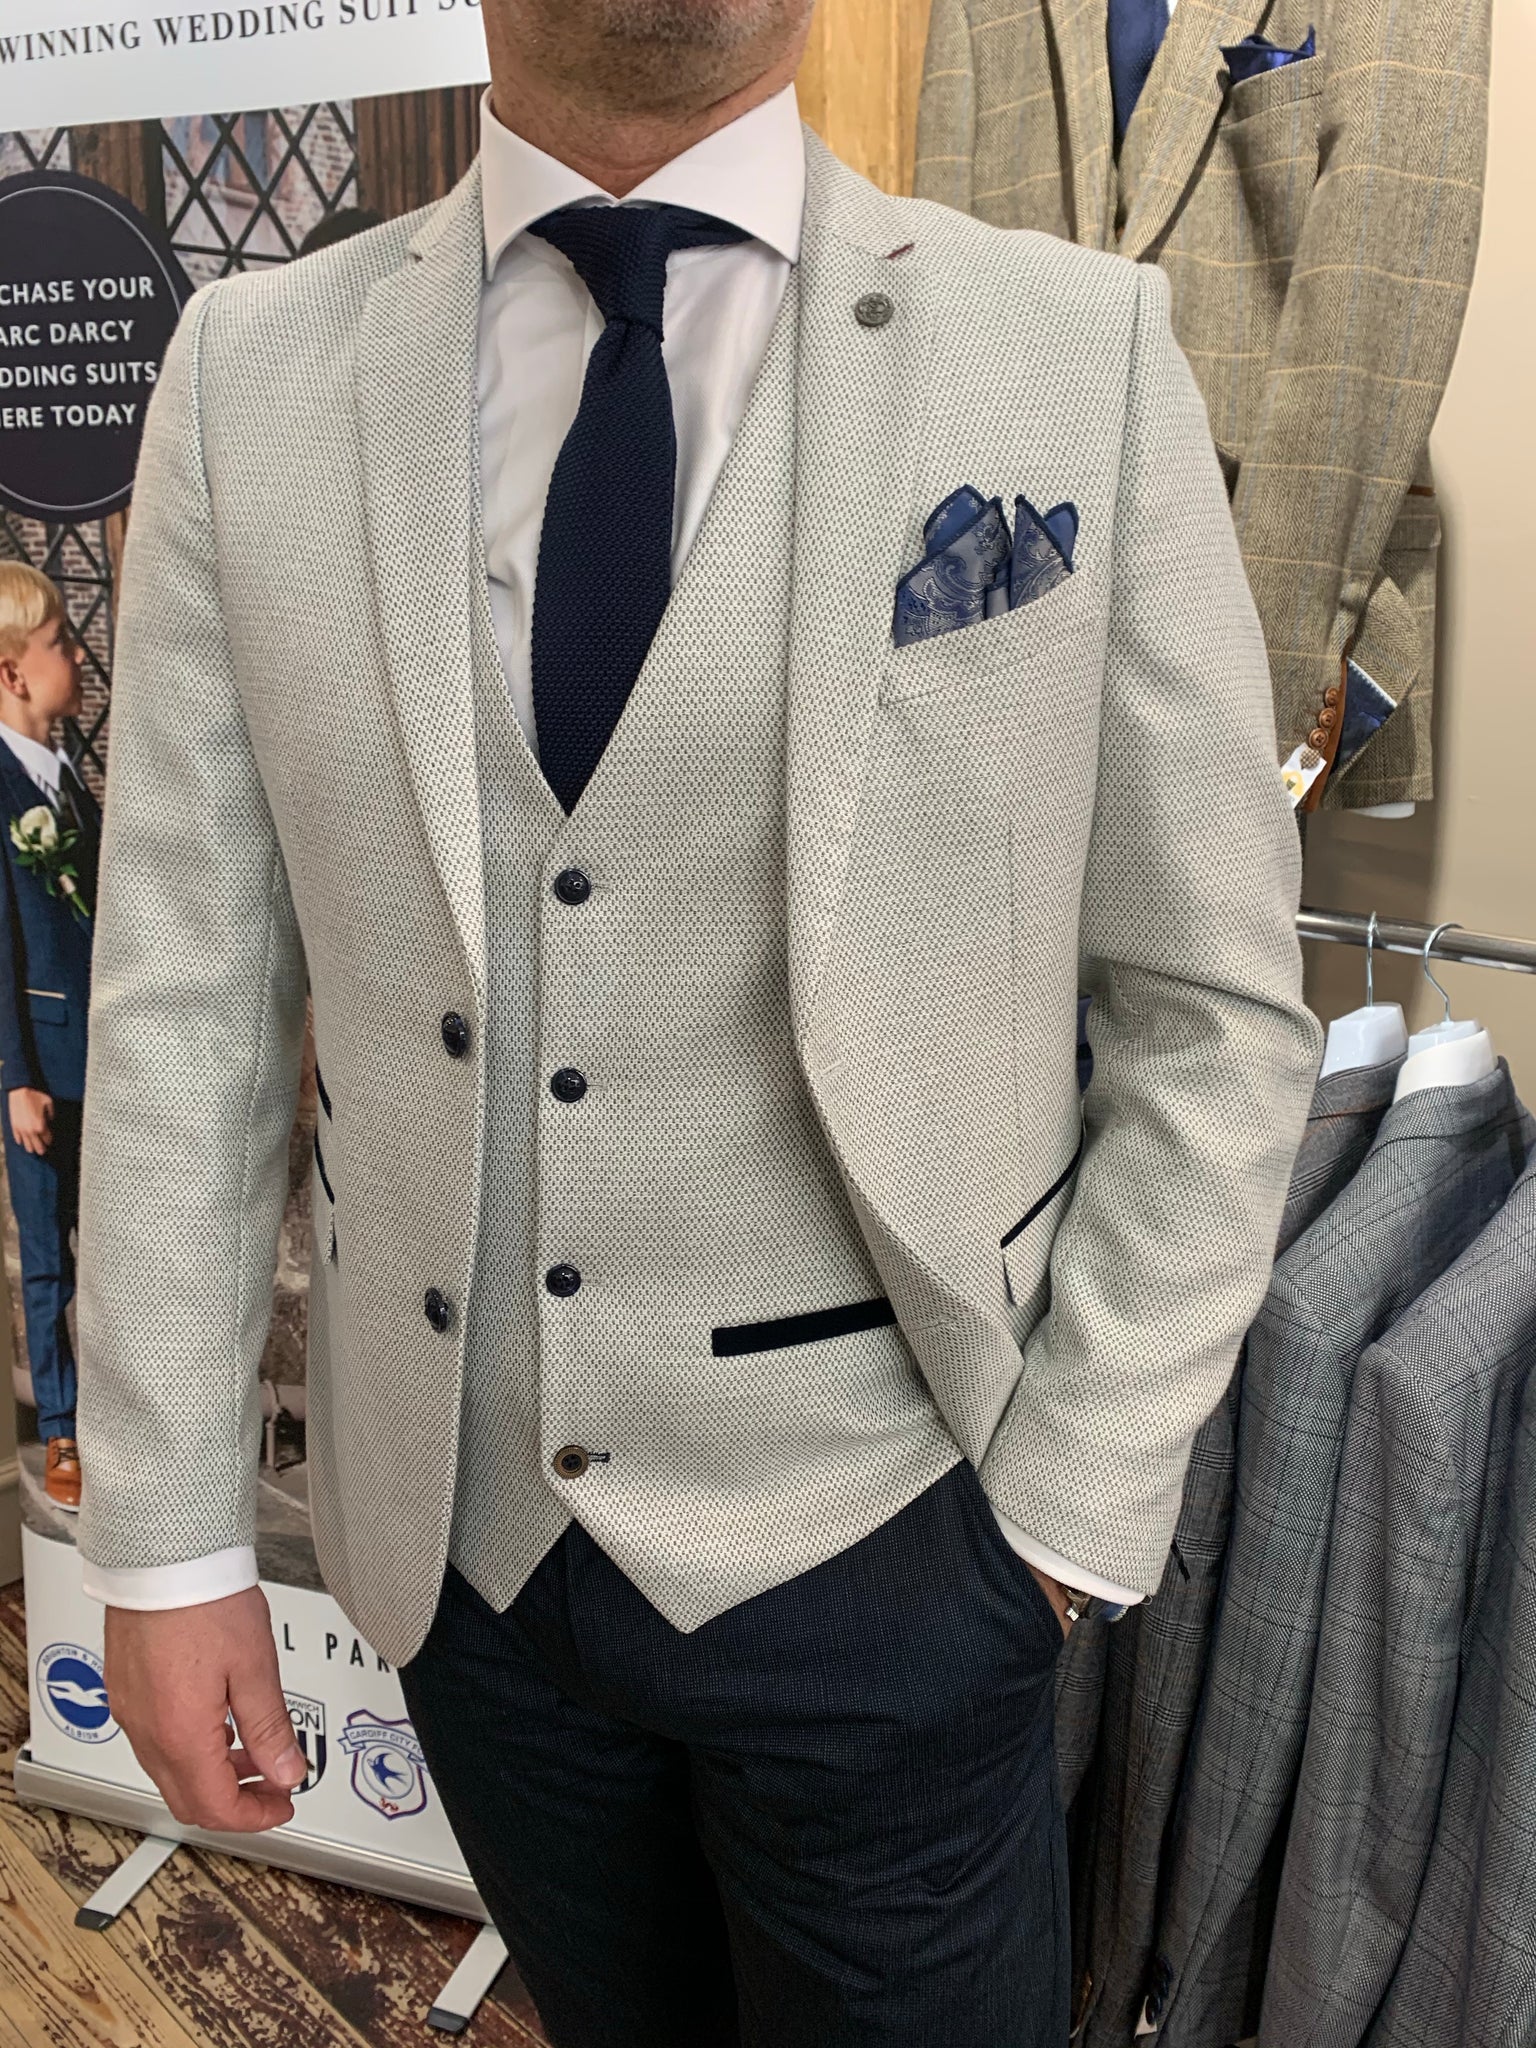 Blue Check Suit With Grey Waistcoat  Marc Darcy